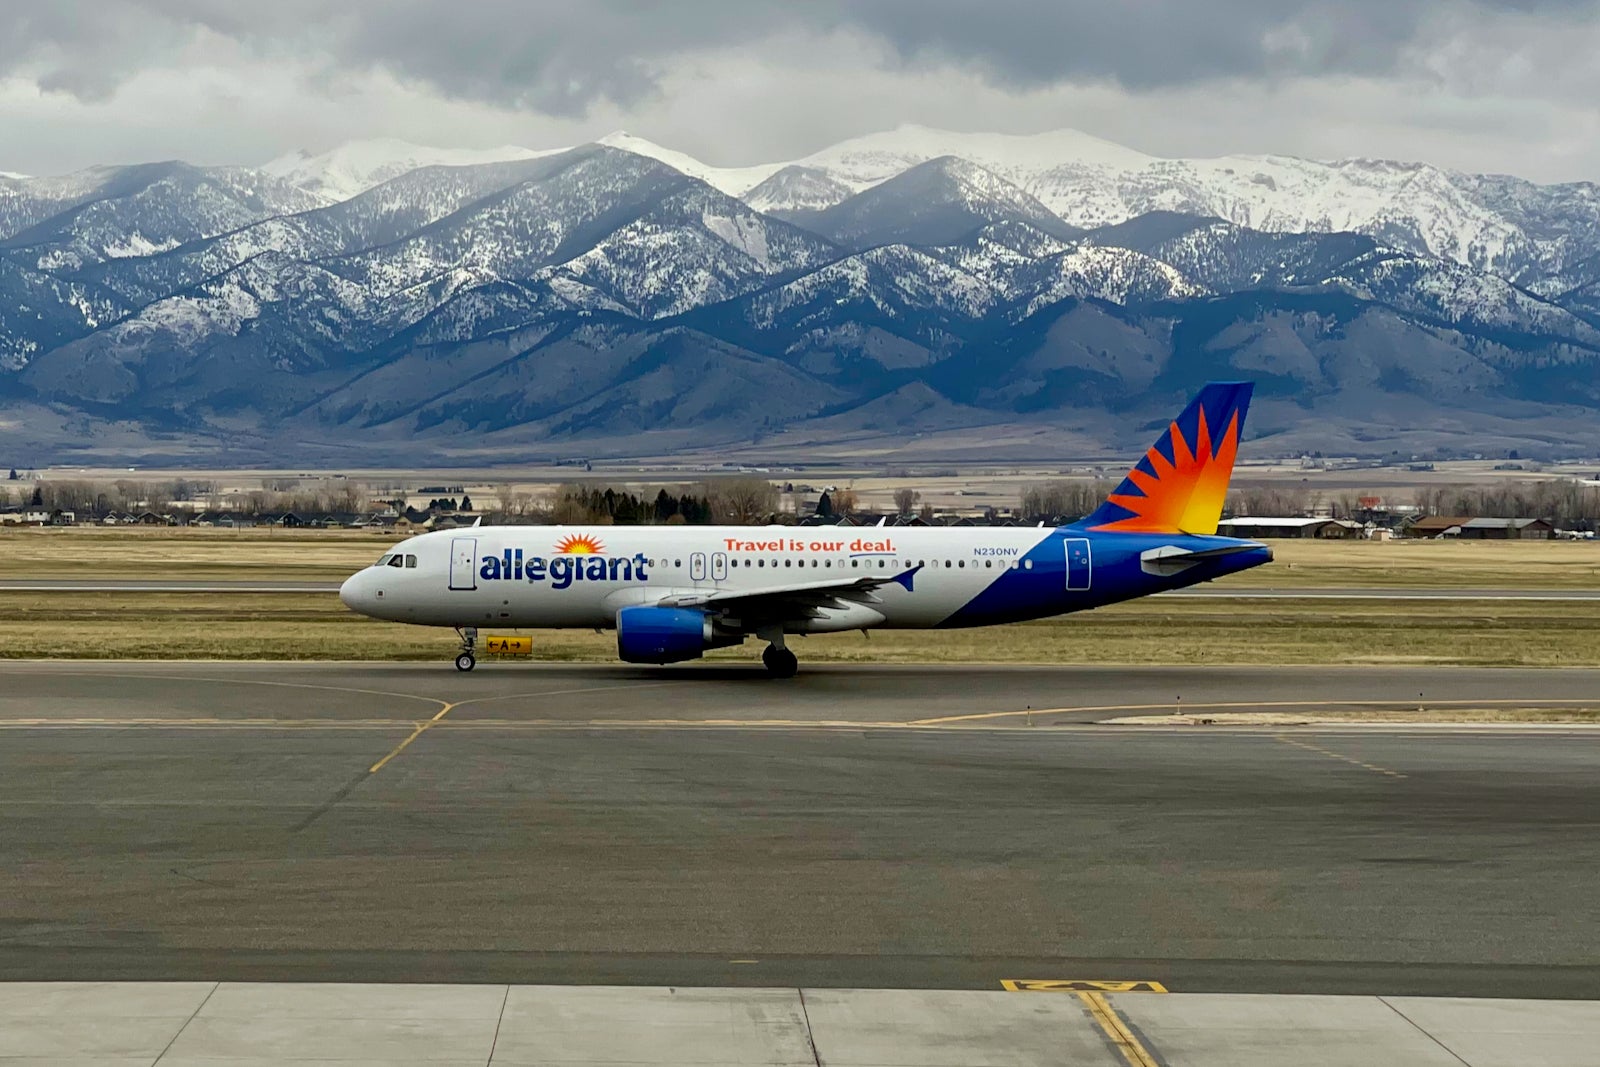 Allegiant adds 4 new cities in 23-route expansion